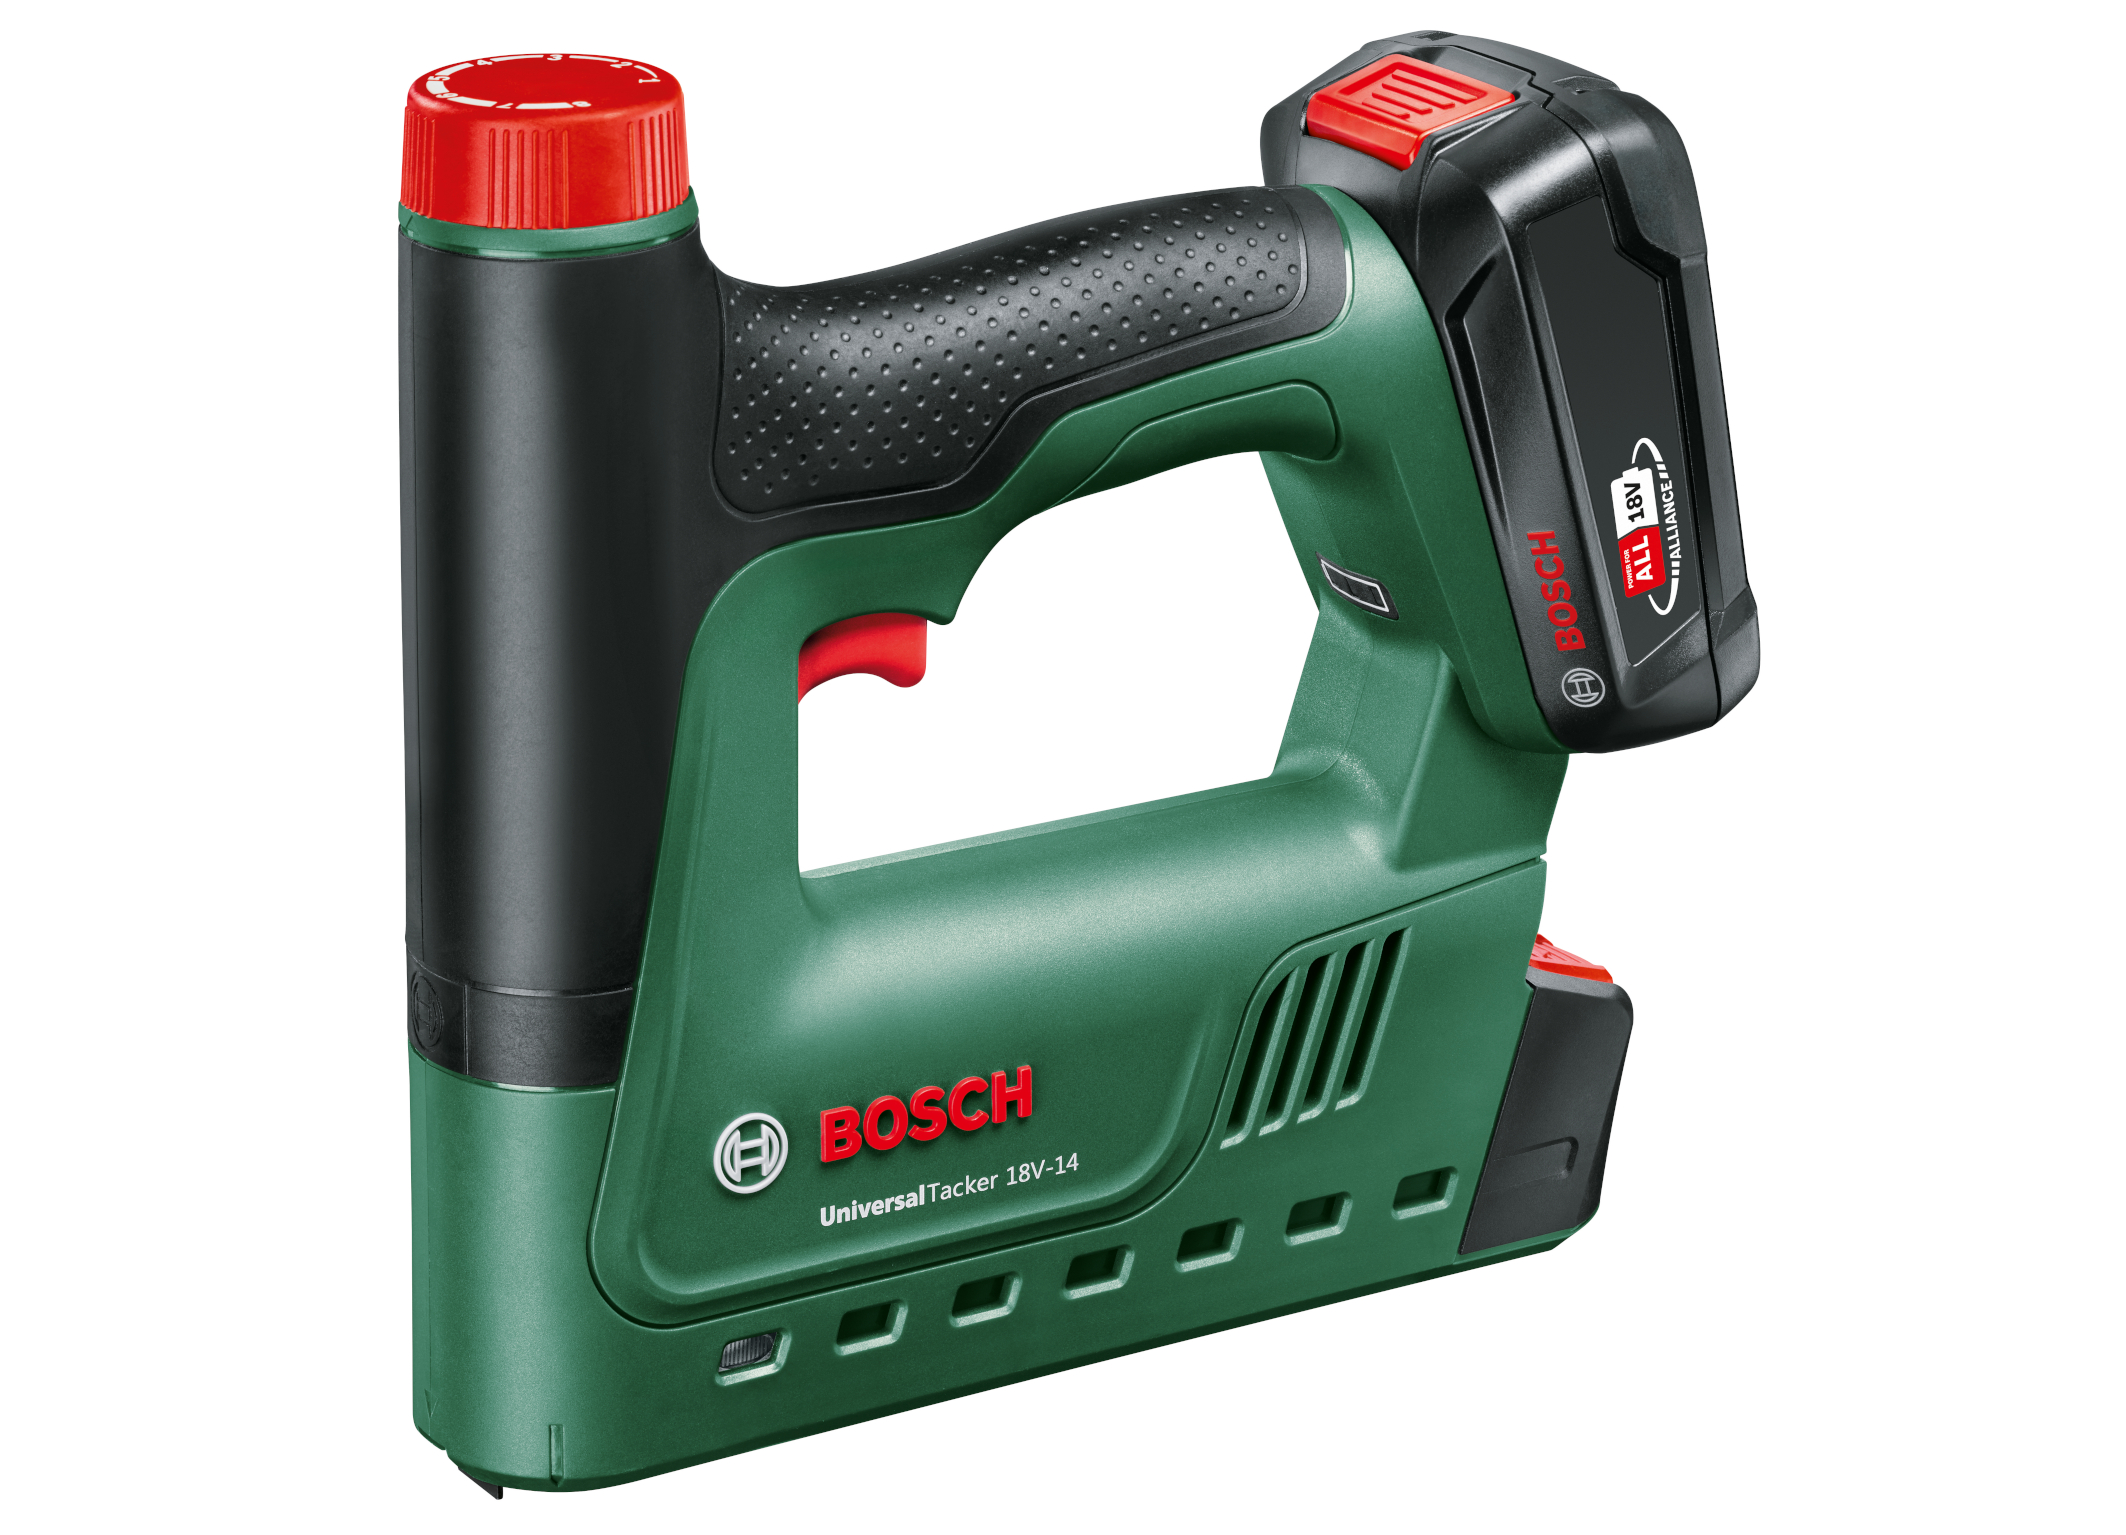 Powerful addition to the ‘18V Power for All System’: First 18V cordless tacker from Bosch for DIYers